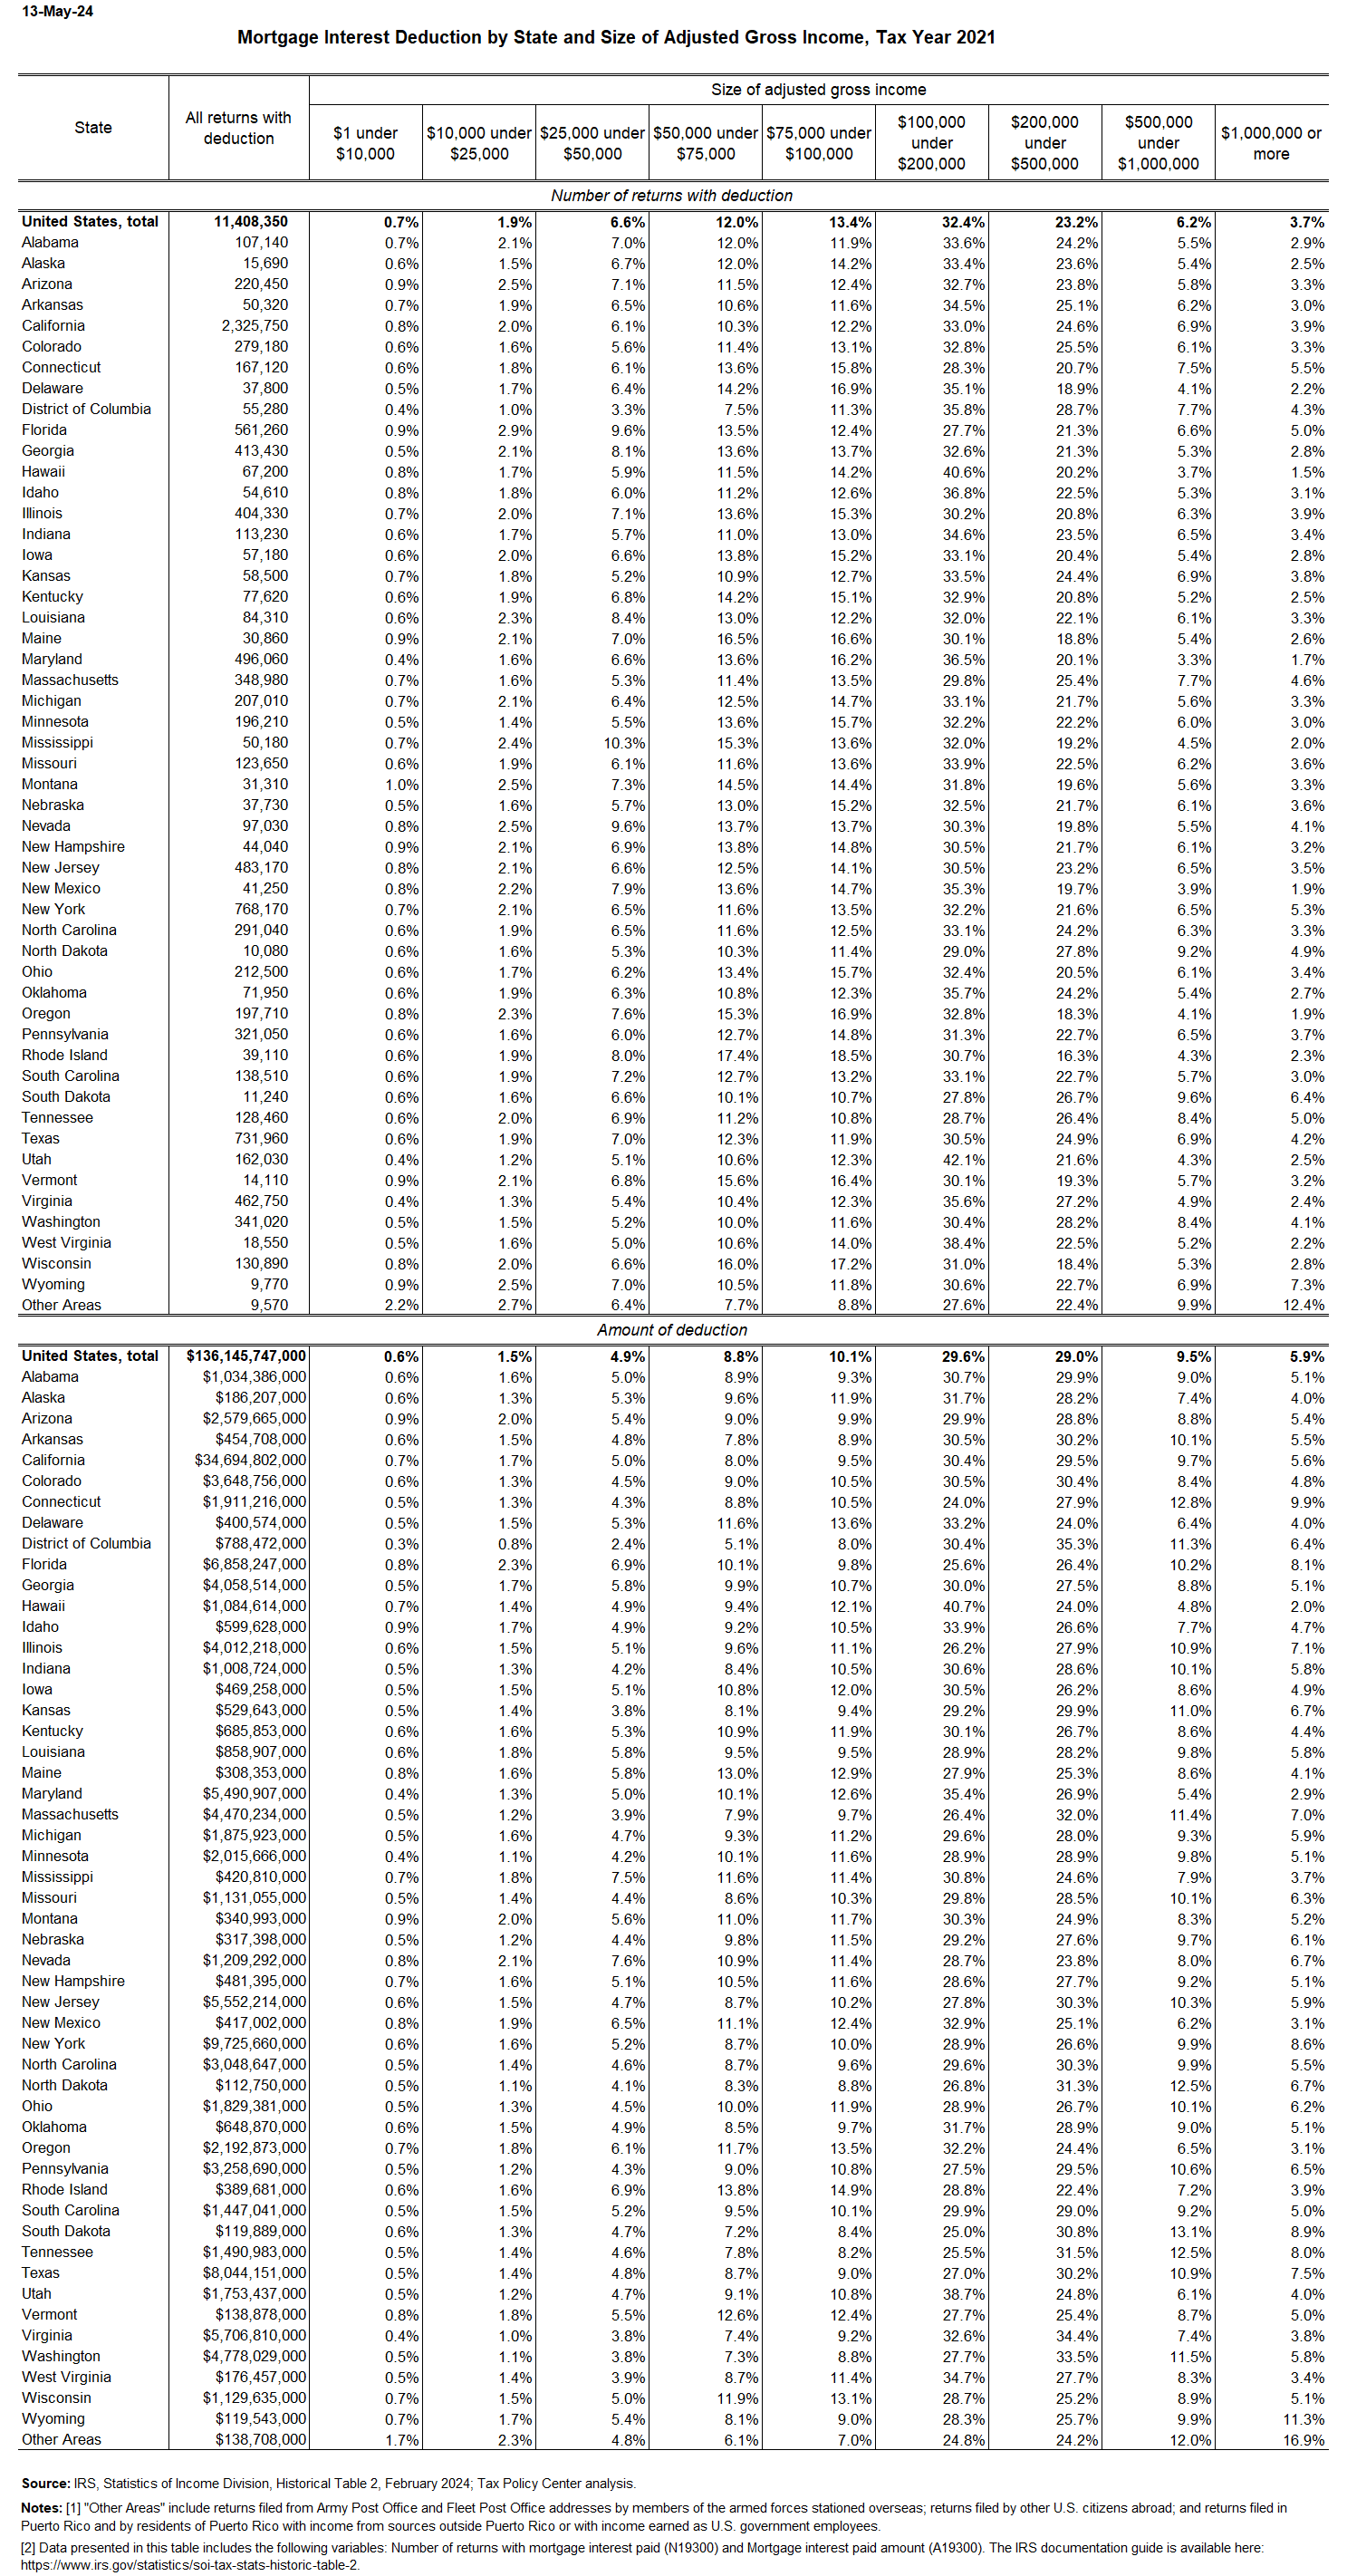 Mortgage interest deduction by state and AGI